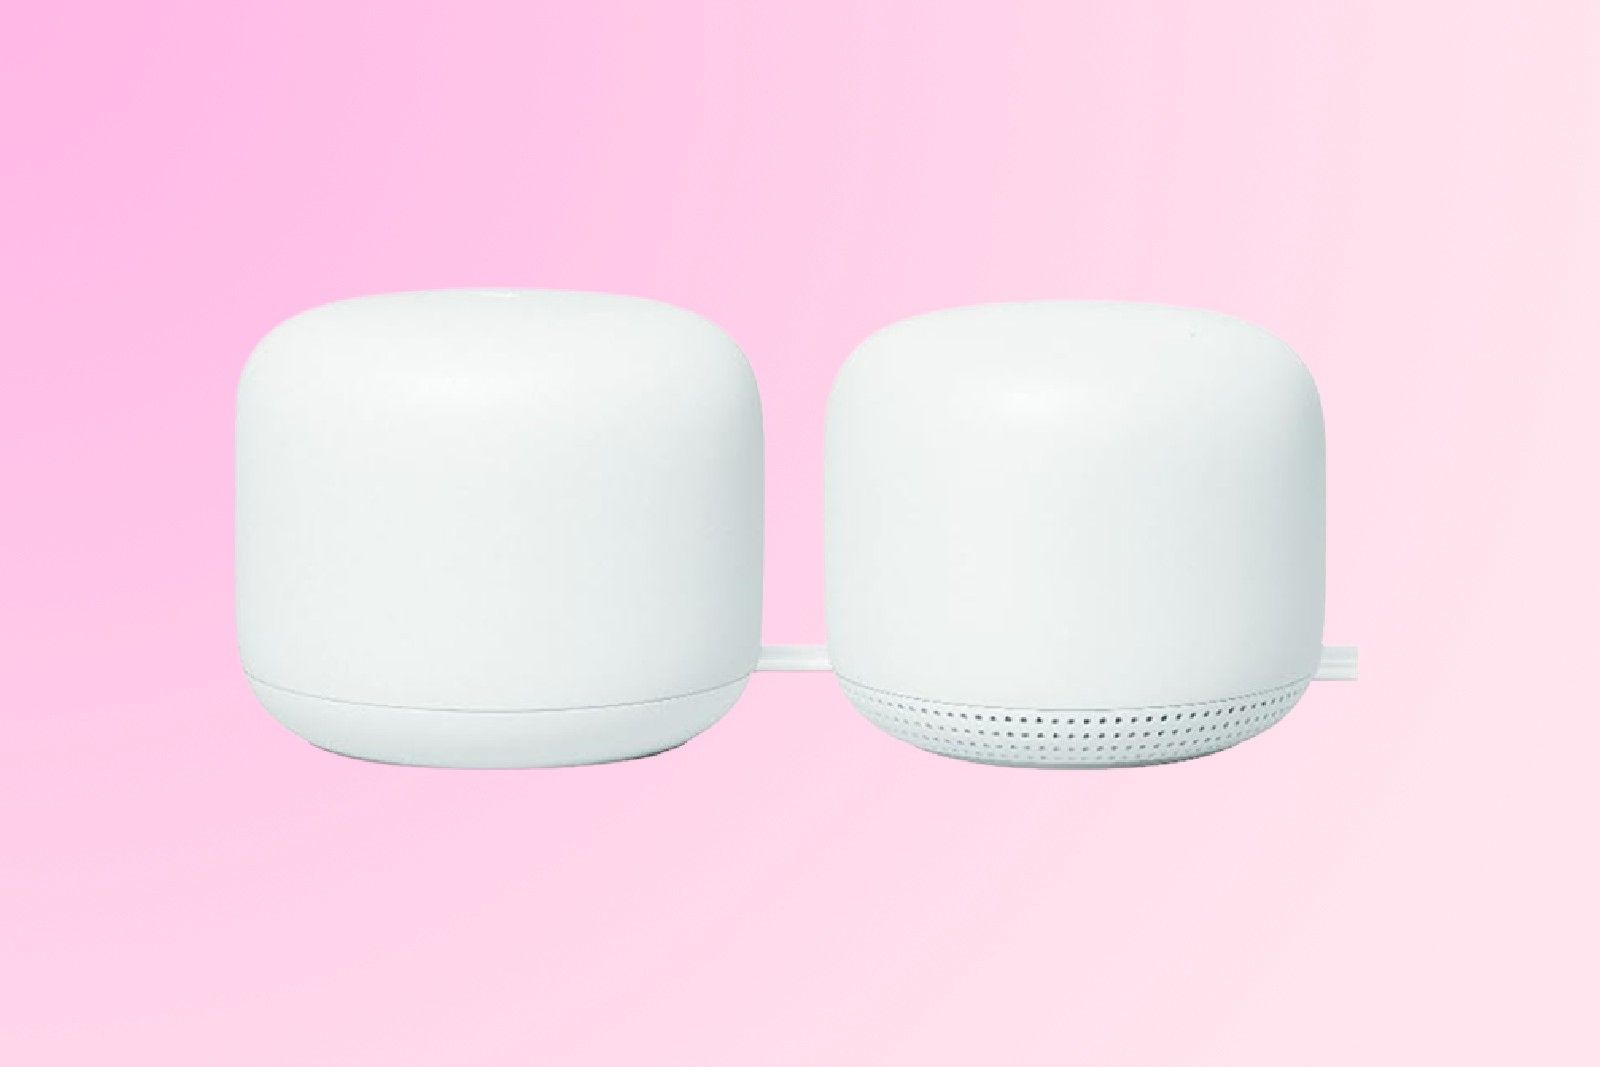 Google Nest mesh Wi-Fi against a pink background